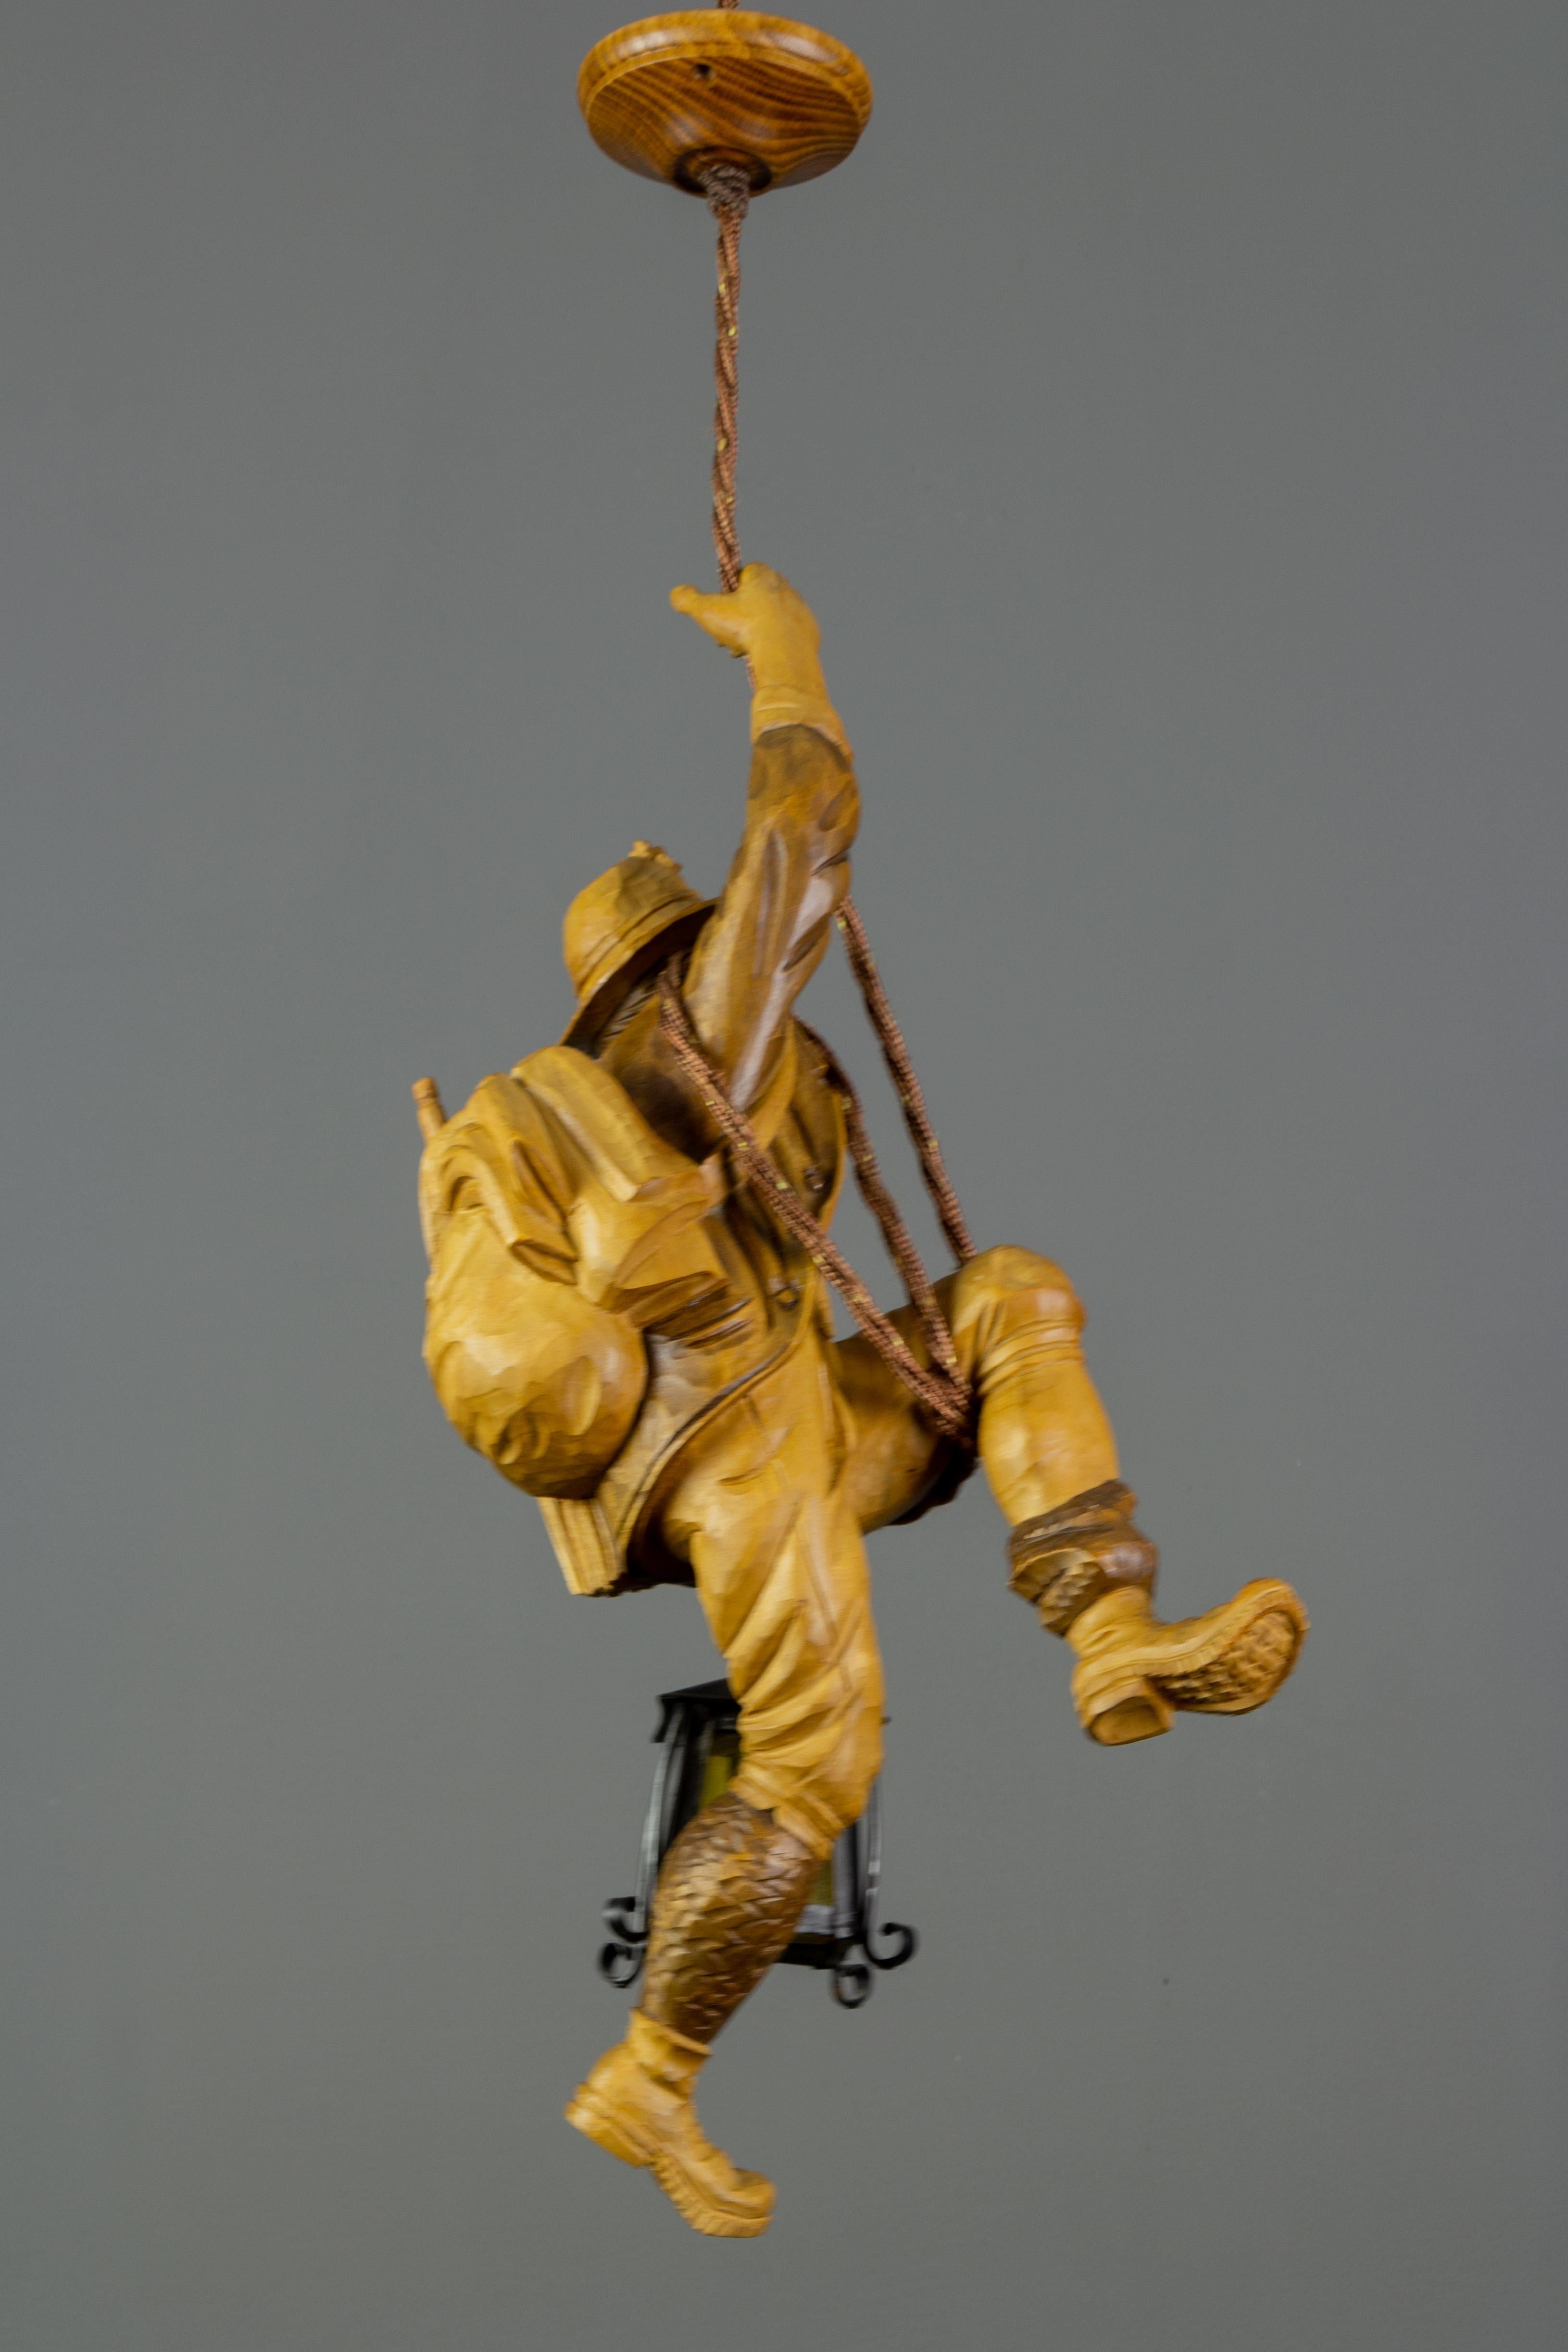 Mid-20th Century Pendant Light Fixture Hand Carved Wood Figure Climber with Lantern, Germany